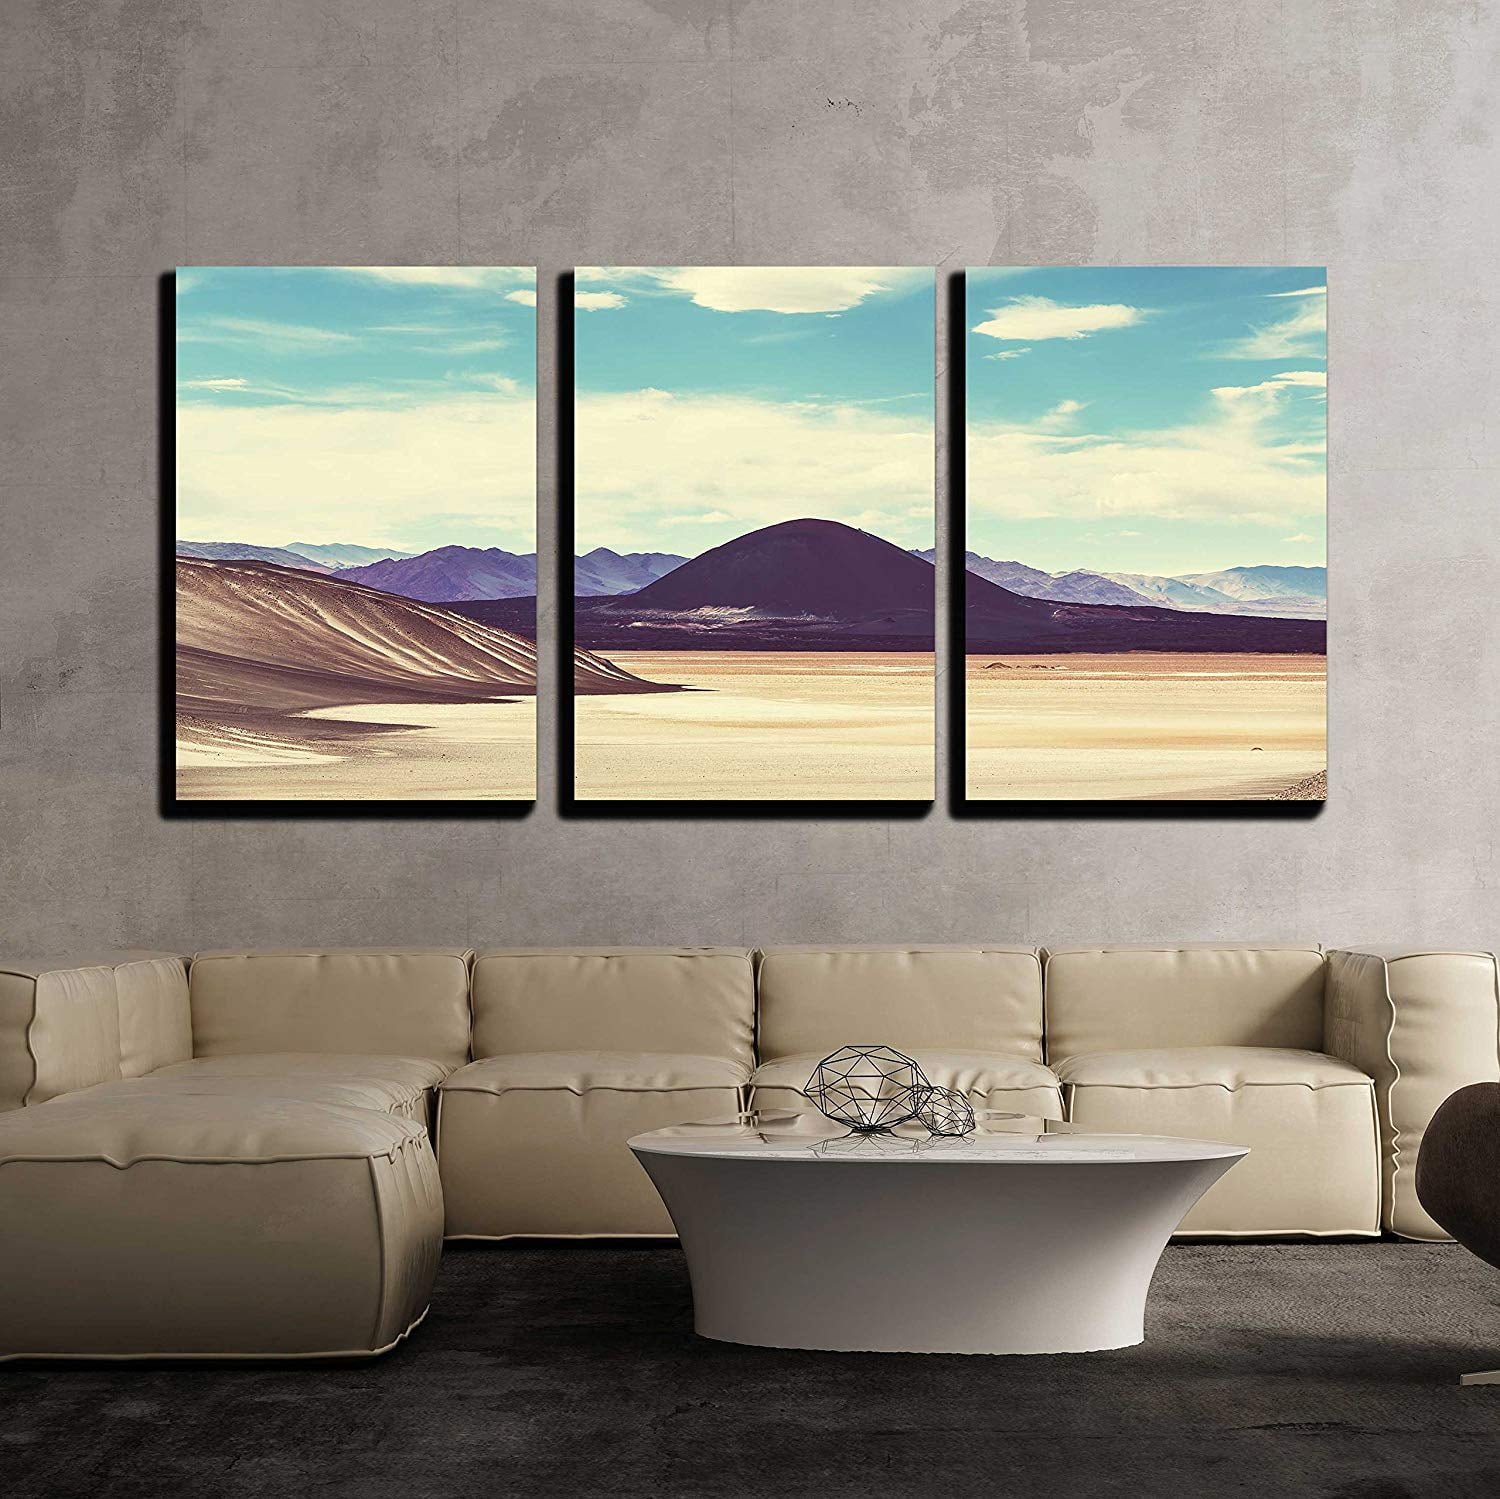 Desempleados rumor traductor Wall26 3 Piece Canvas Wall Art - Landscapes in Northern Argentina - Modern Home  Decor Stretched and Framed Ready to Hang - 24"x36"x3 Panels - Walmart.com